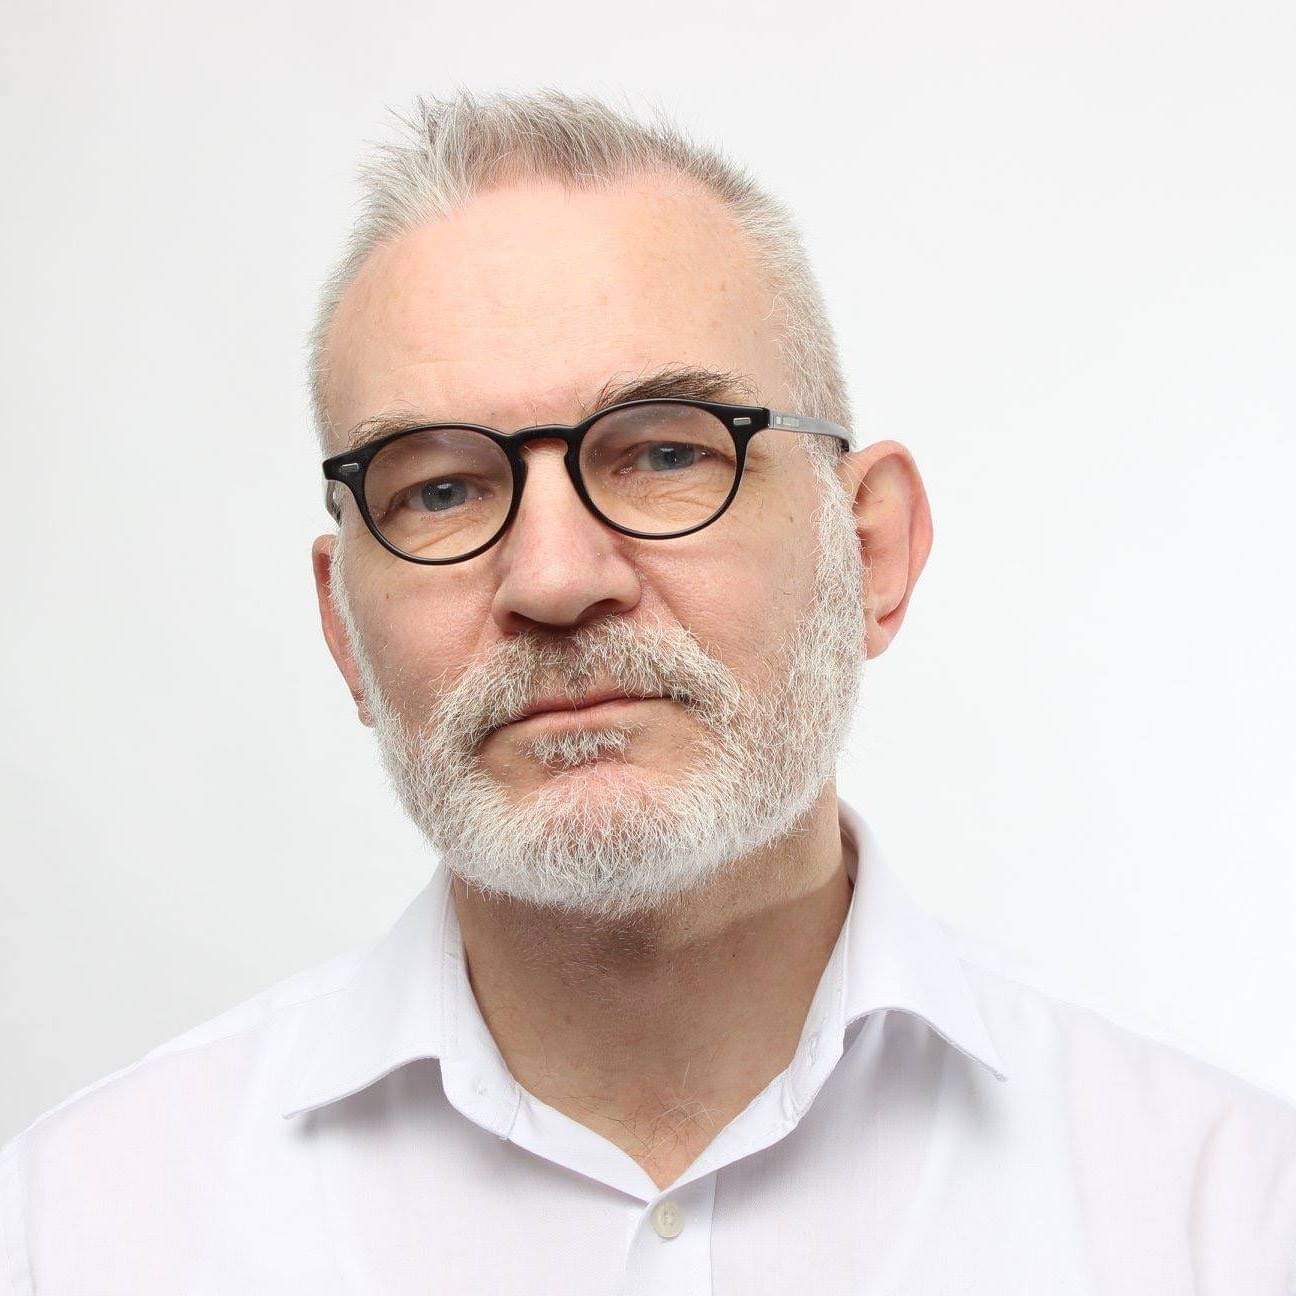 Andrew Boff pictured wearing a white shirt against a white background.